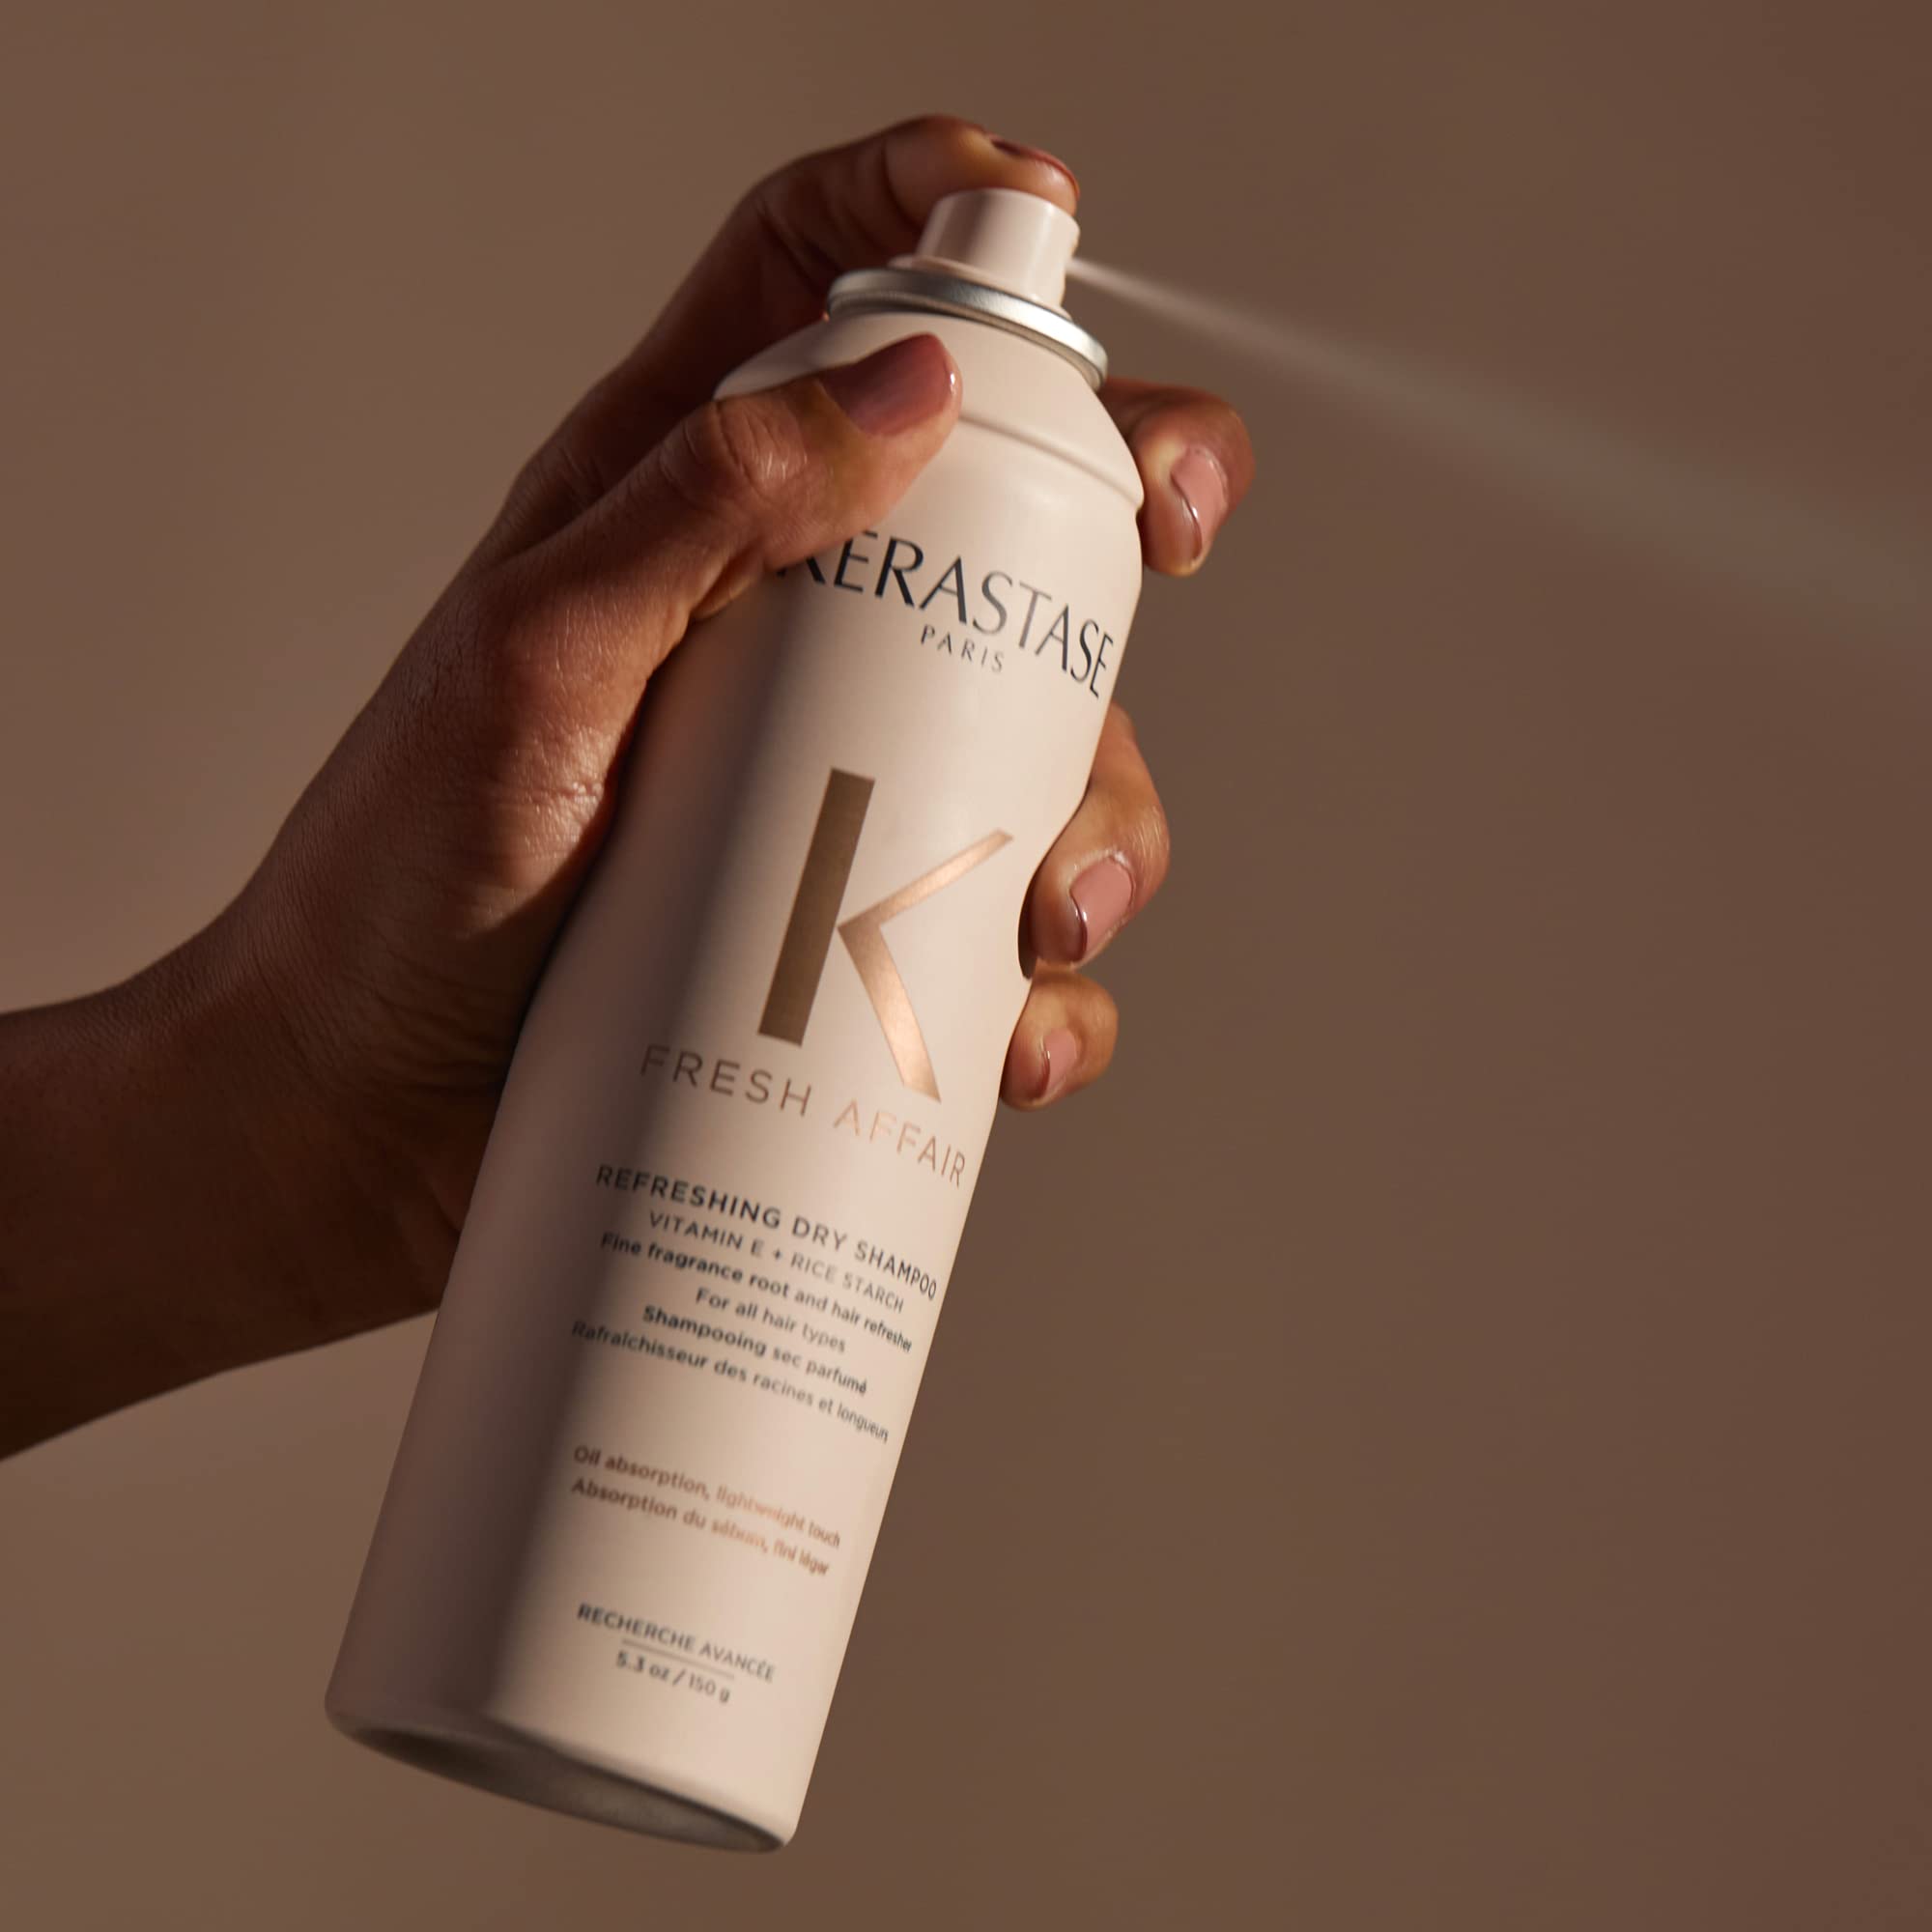 KERASTASE Fresh Affair Dry Shampoo | Fine Fragrance Root and Hair Refresher | Instantly Absorbs Excess Oil on Scalp and Hair | Lightweight | Fresh Scent | Silicone Free | For All Hair Types